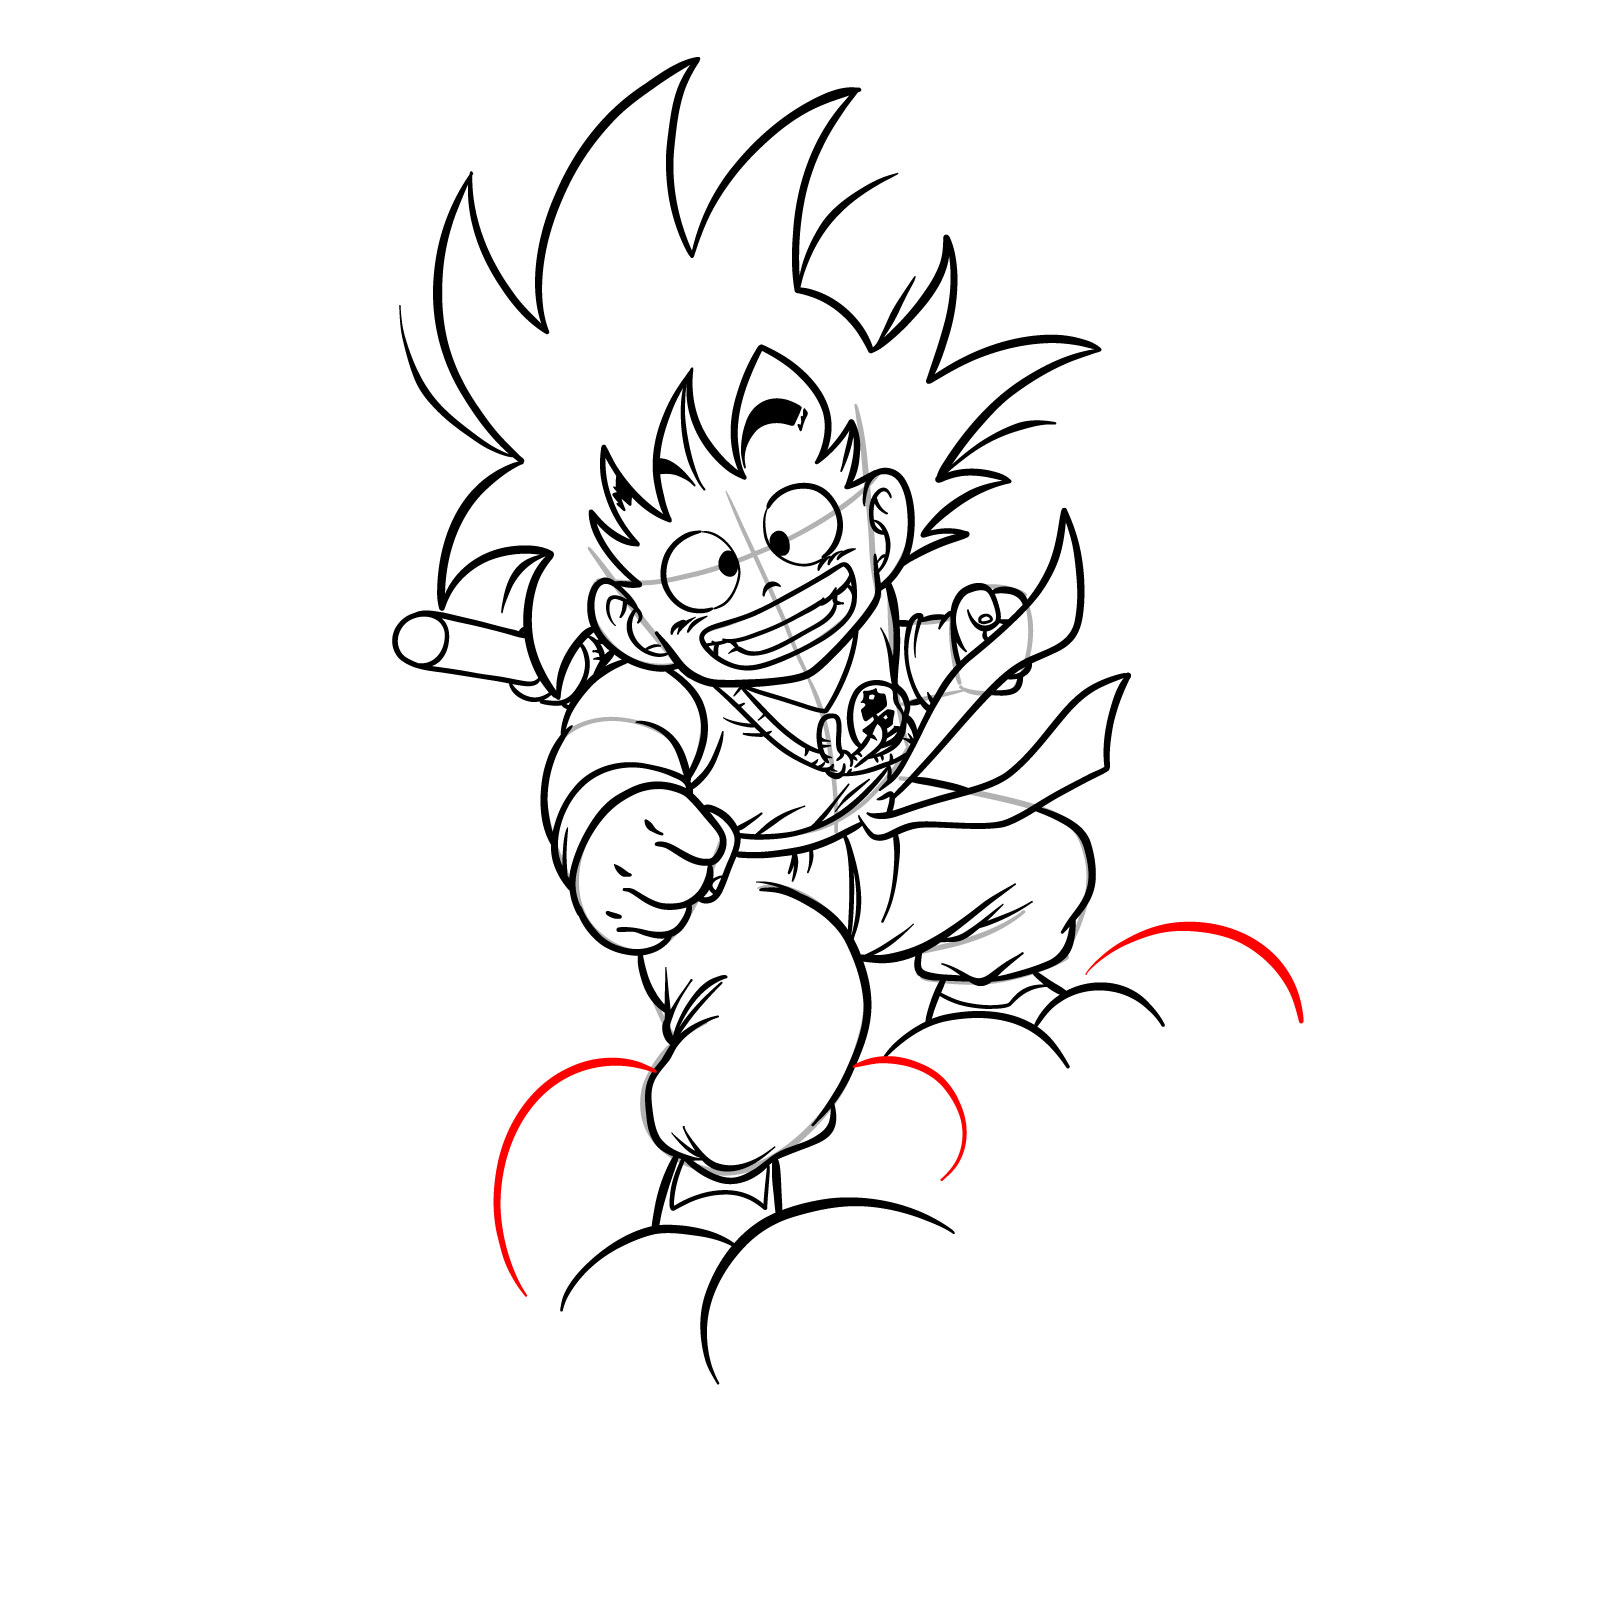 How to draw Kid Goku riding on the Flying Nimbus - step 25